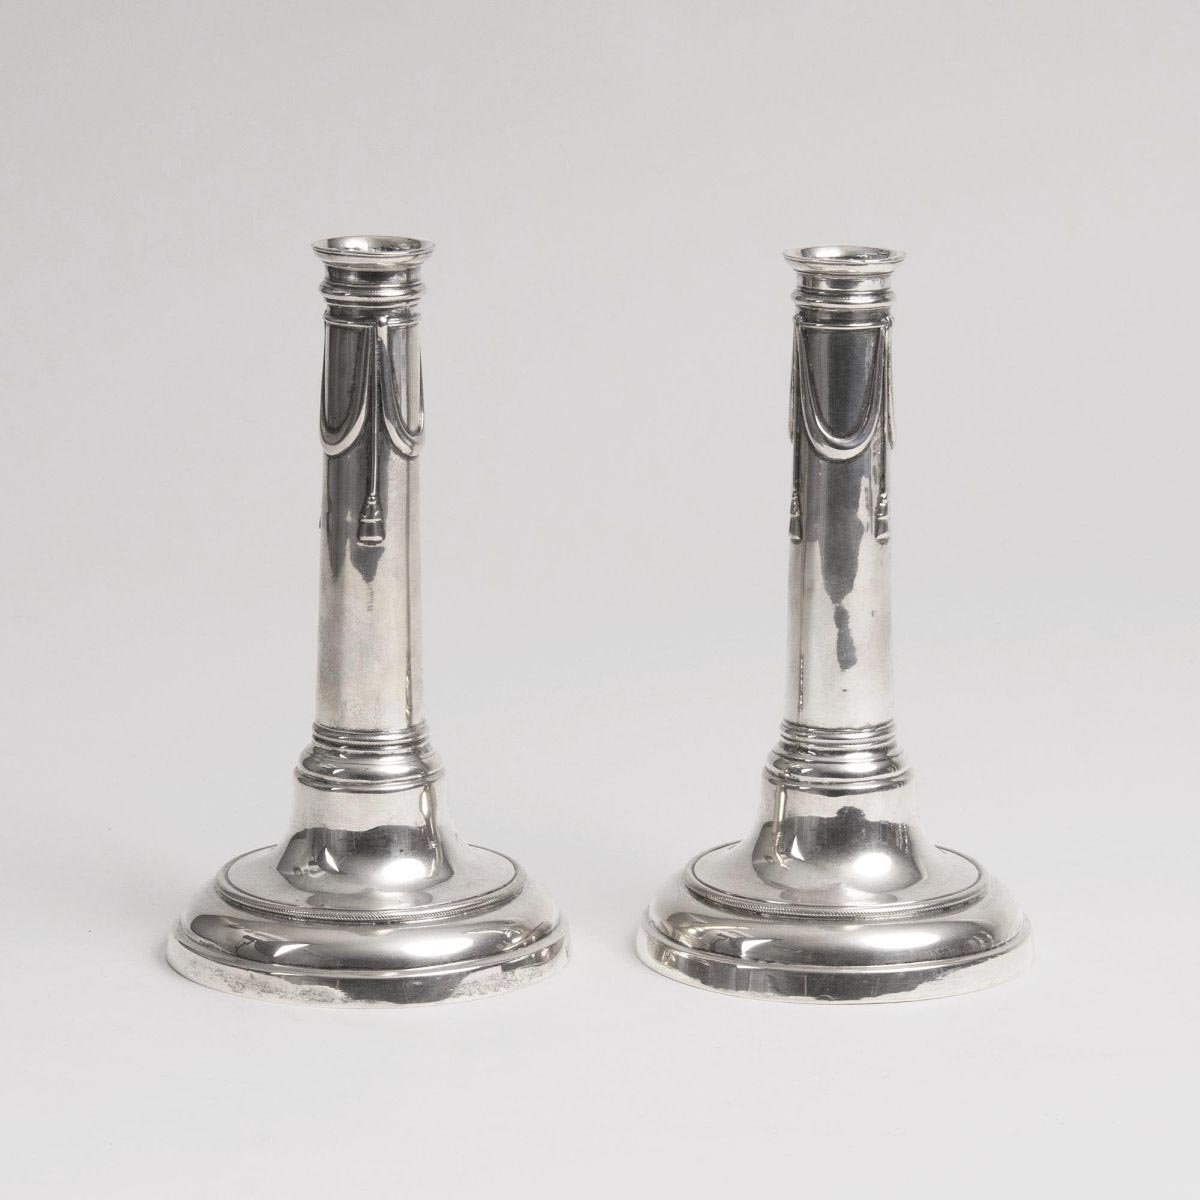 A Pair of Classicistic Candelholders